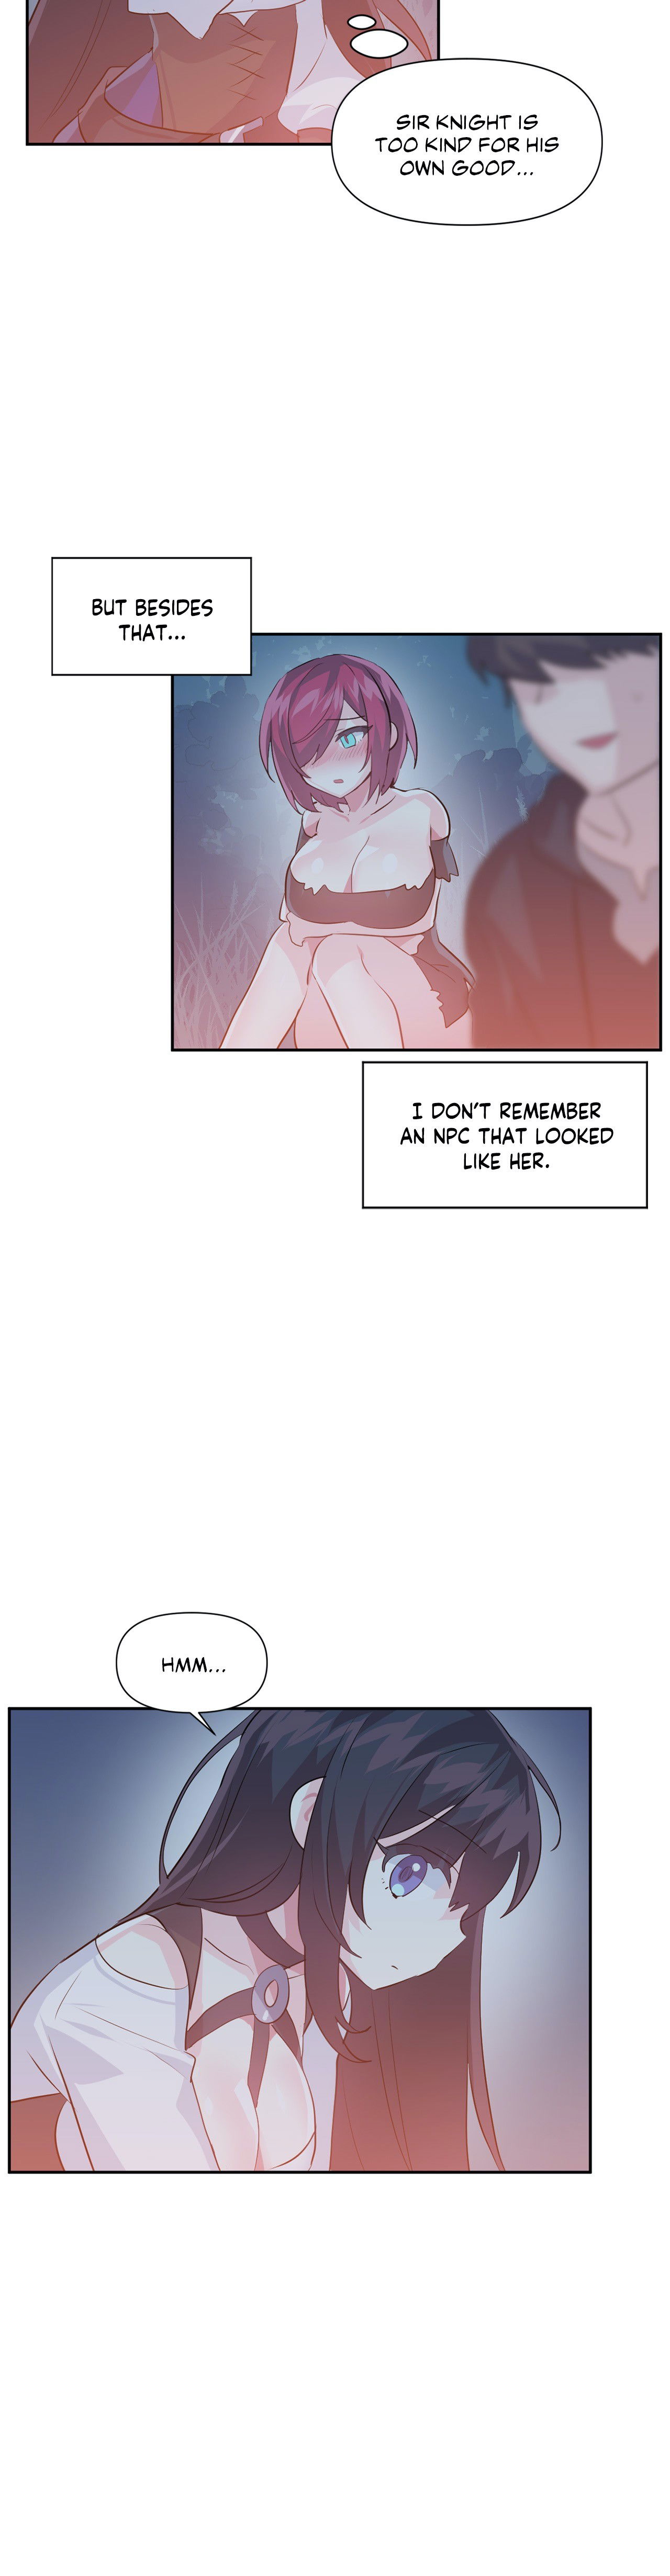 log-in-to-lust-a-land-chap-37-9